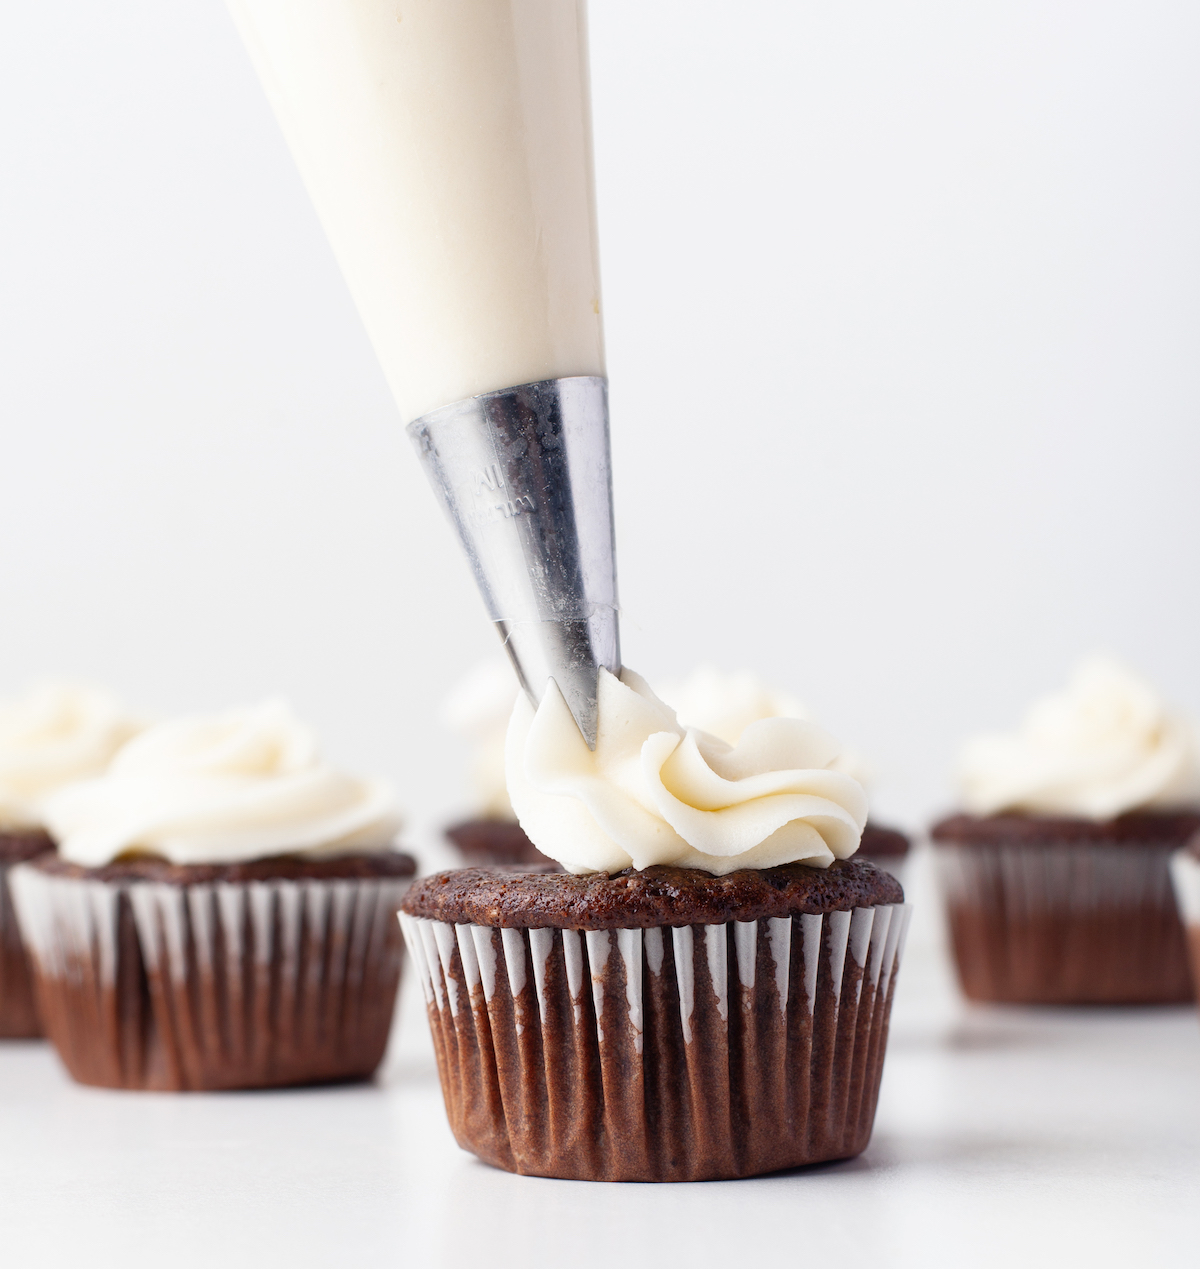 Piping the vanilla frosting onto the cupcakes